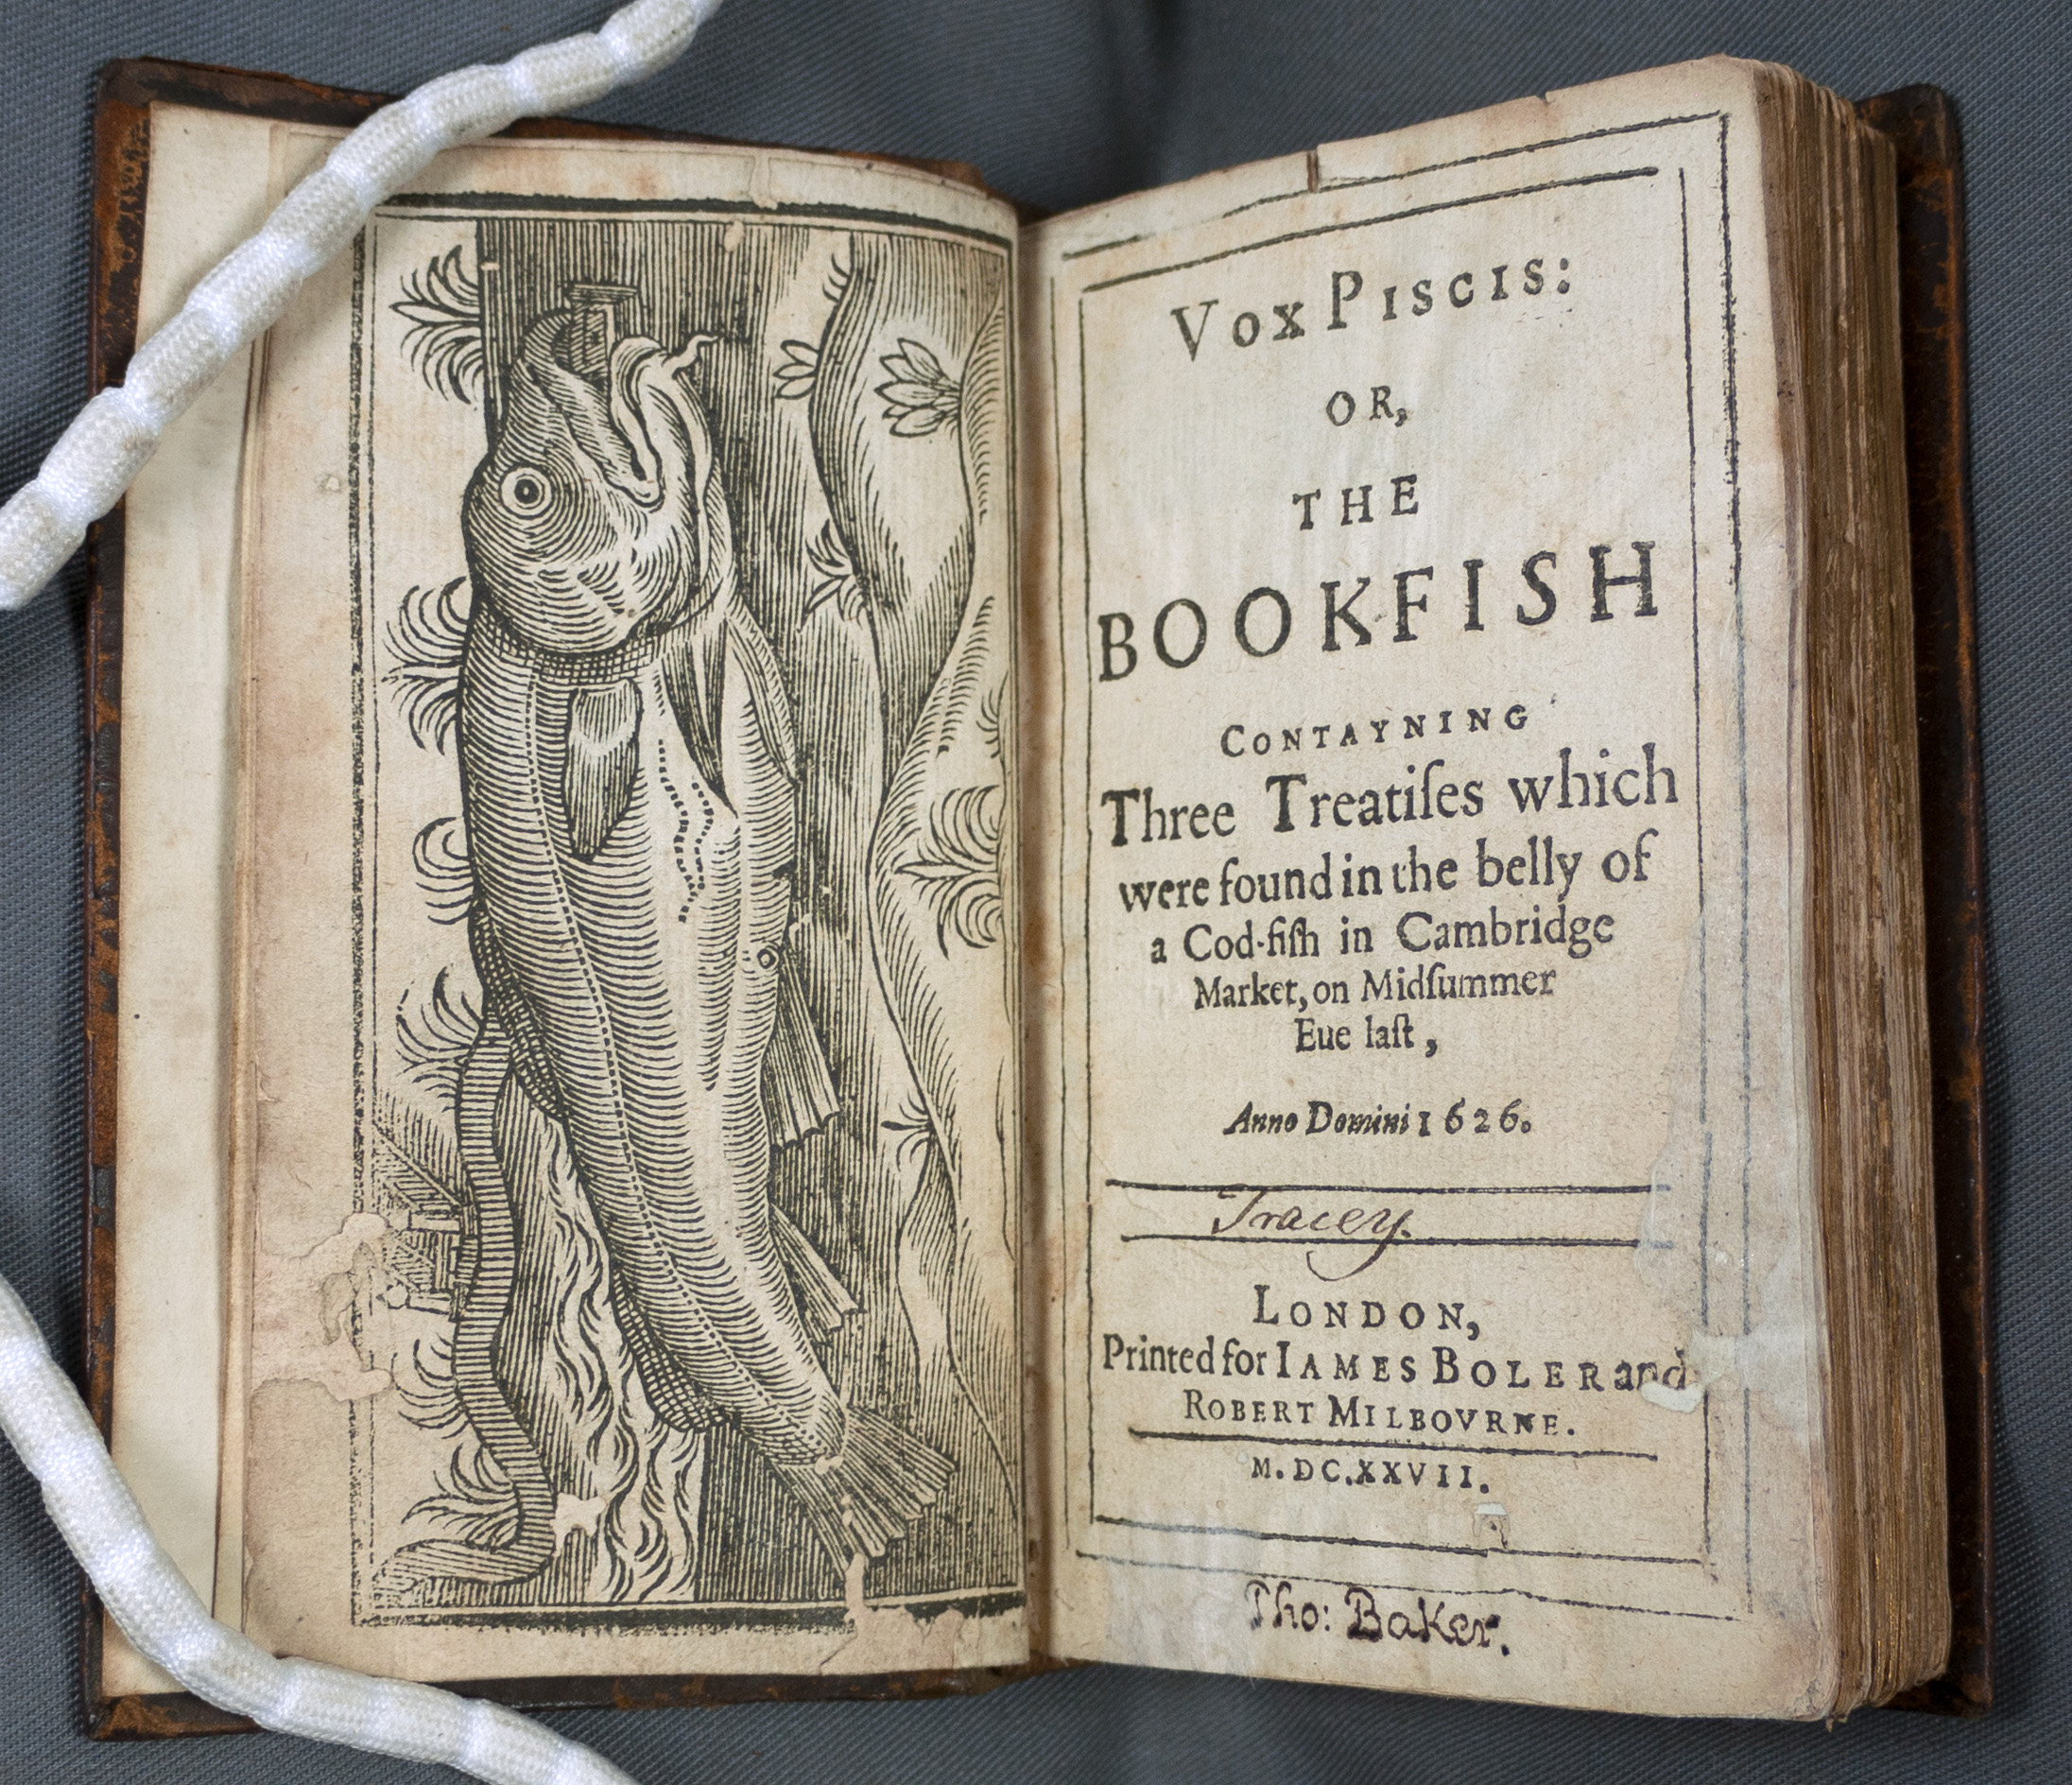 The title page of Vox Piscis faces a frontispiece illustration of a living cod with a book in its mouth swimming through water.